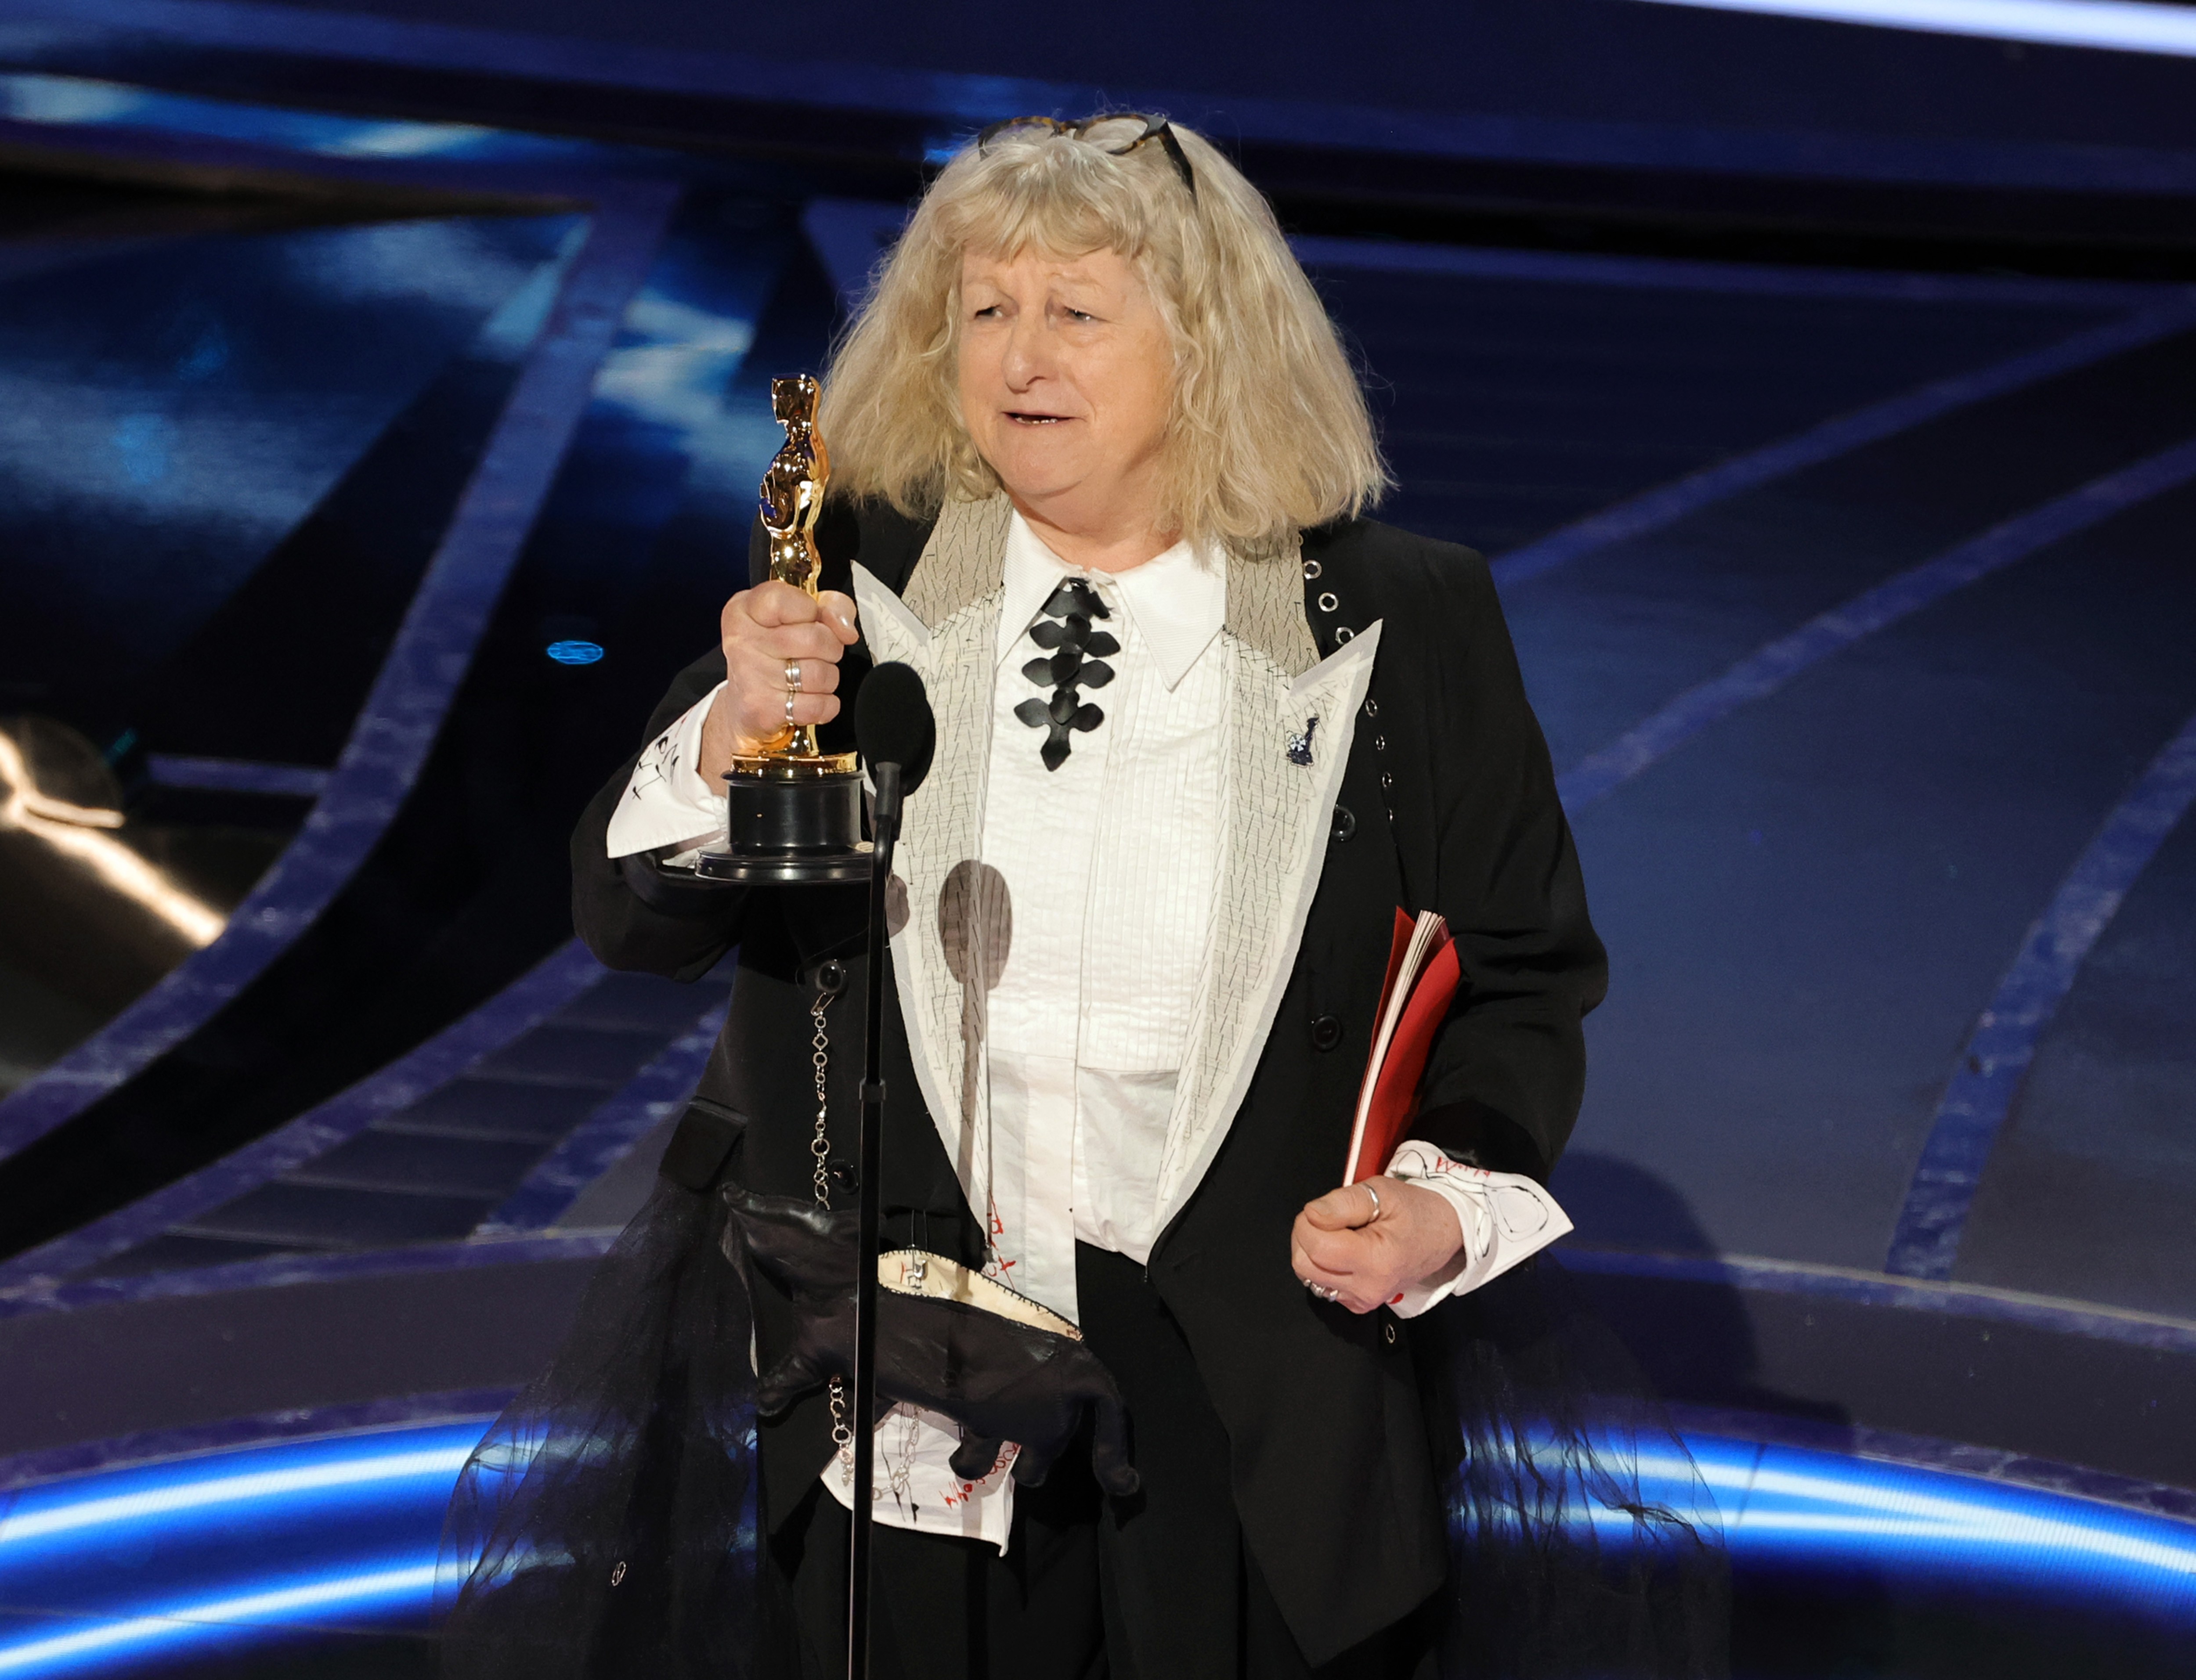 HOLLYWOOD, CALIFORNIA - MARCH 27: Jenny Beavan accepts the Costume Design award for ‘Cruella’ onstage during the 94th Annual Academy Awards at Dolby Theatre on March 27, 2022 in Hollywood, California. (Photo by Neilson Barnard/Getty Images) (Foto: Getty Images)